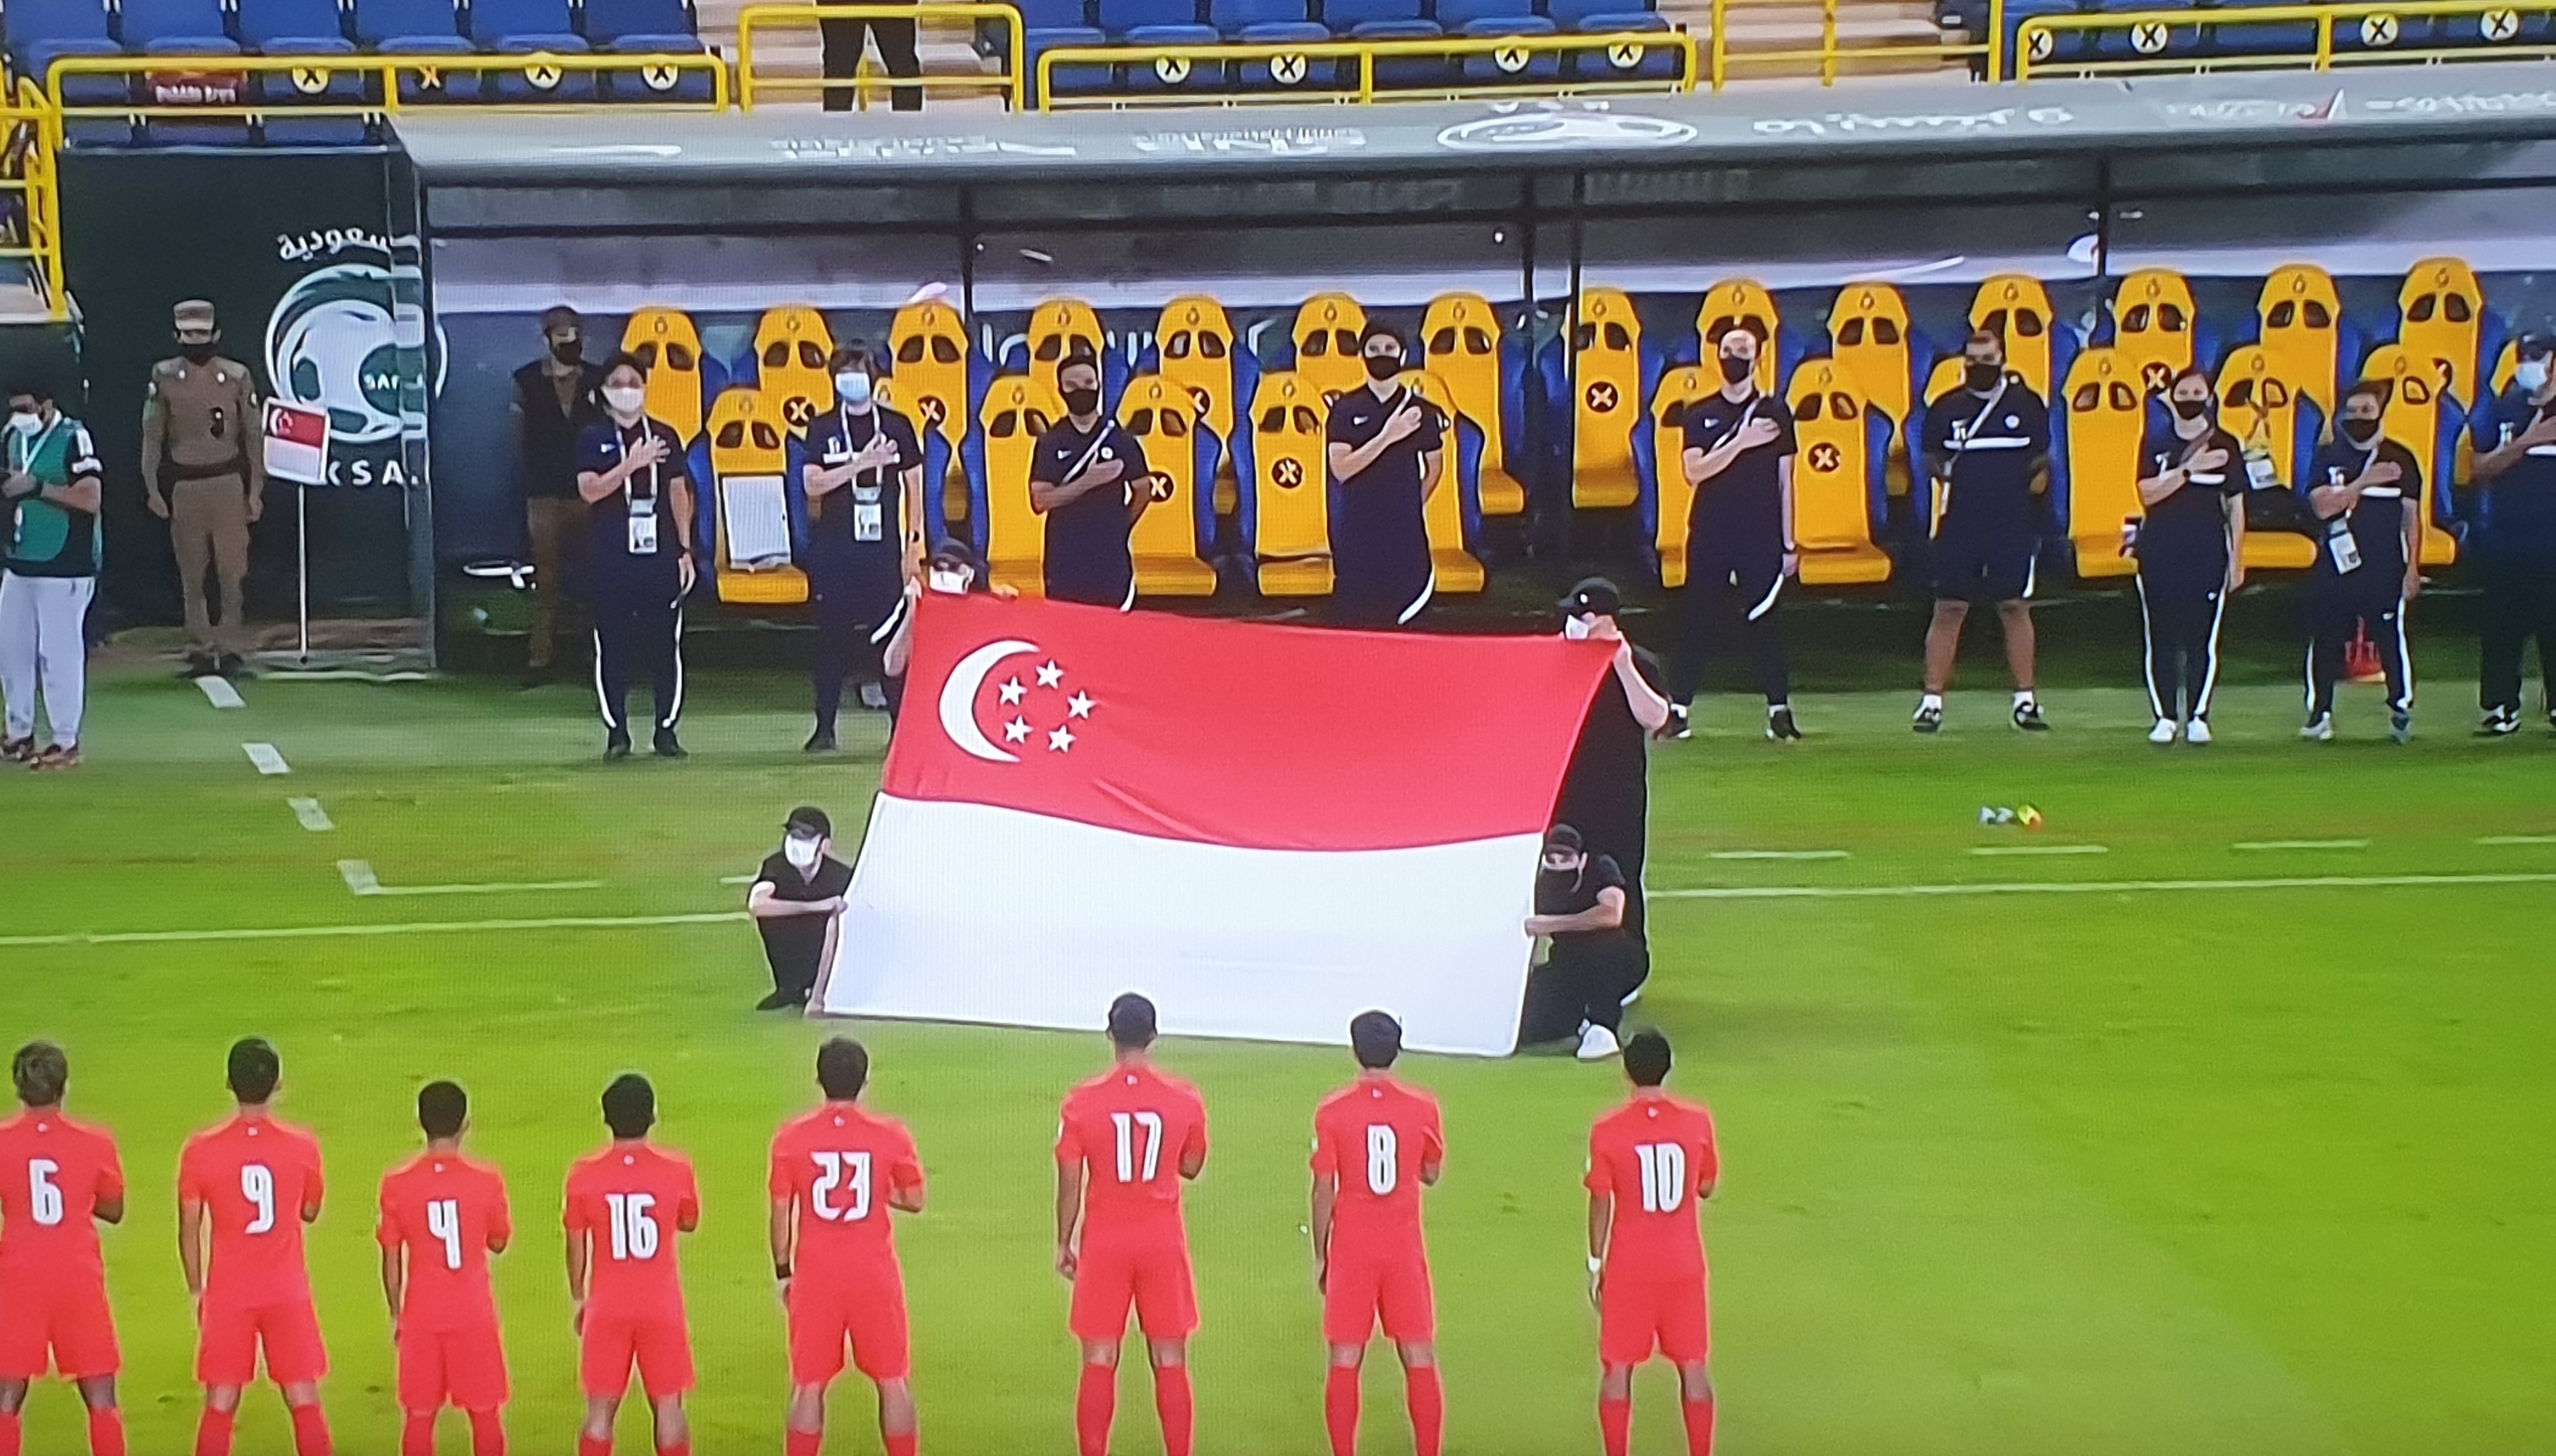 Saudi Arabia's 3 late goals deny Singapore a commendable showing!